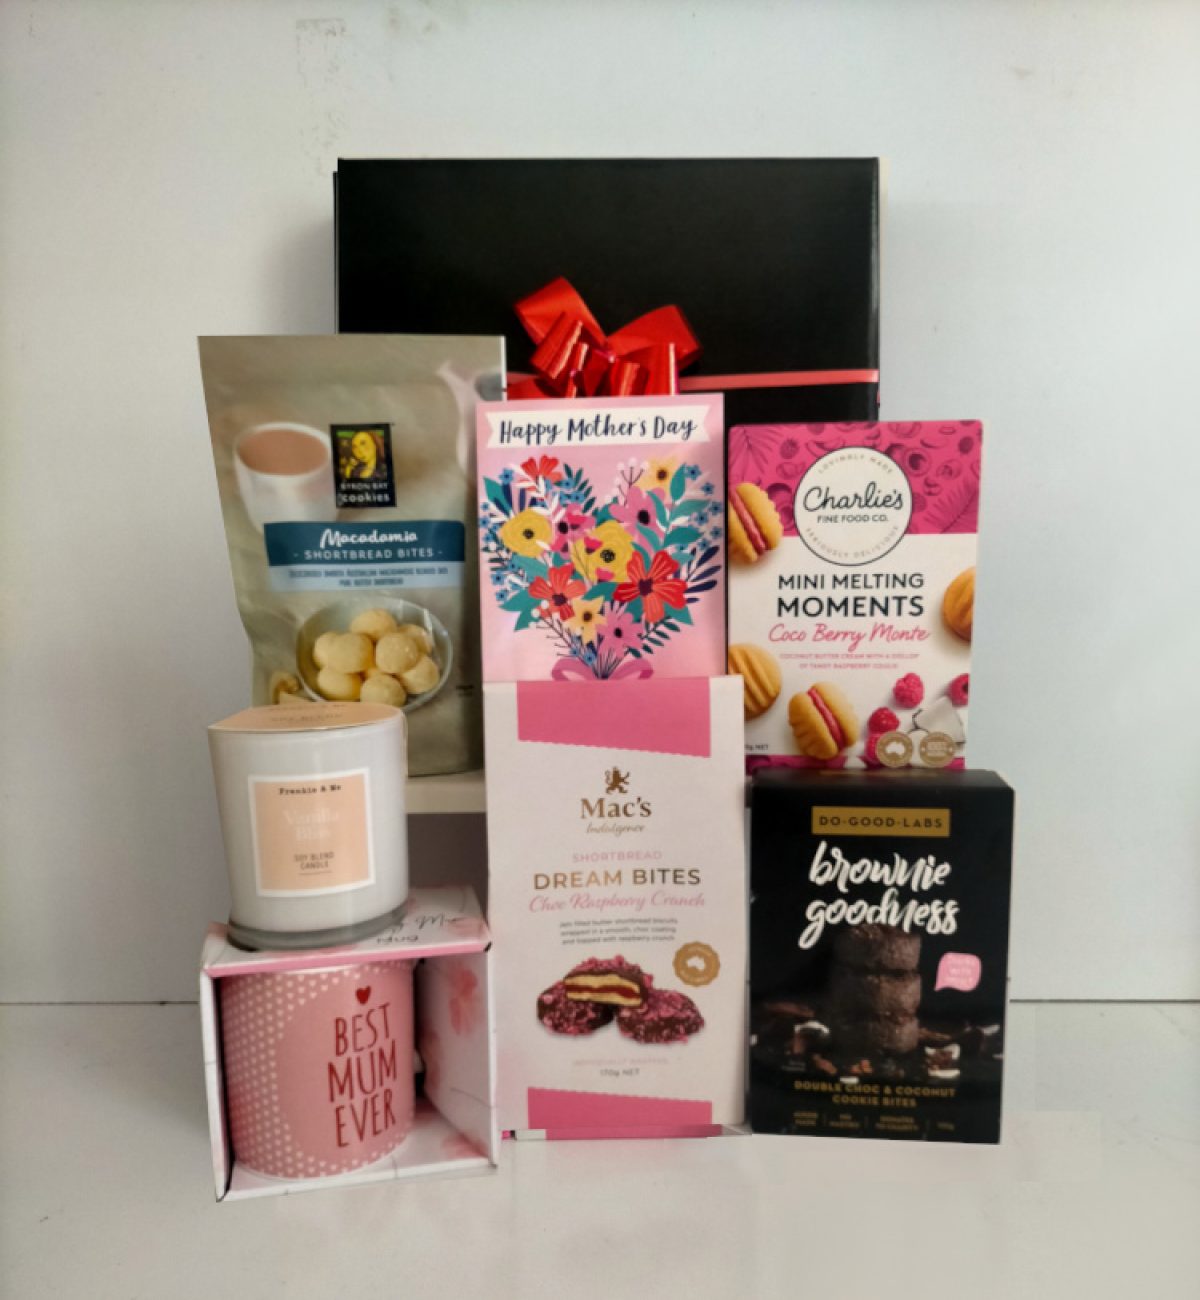 Perth Gifts & Hampers